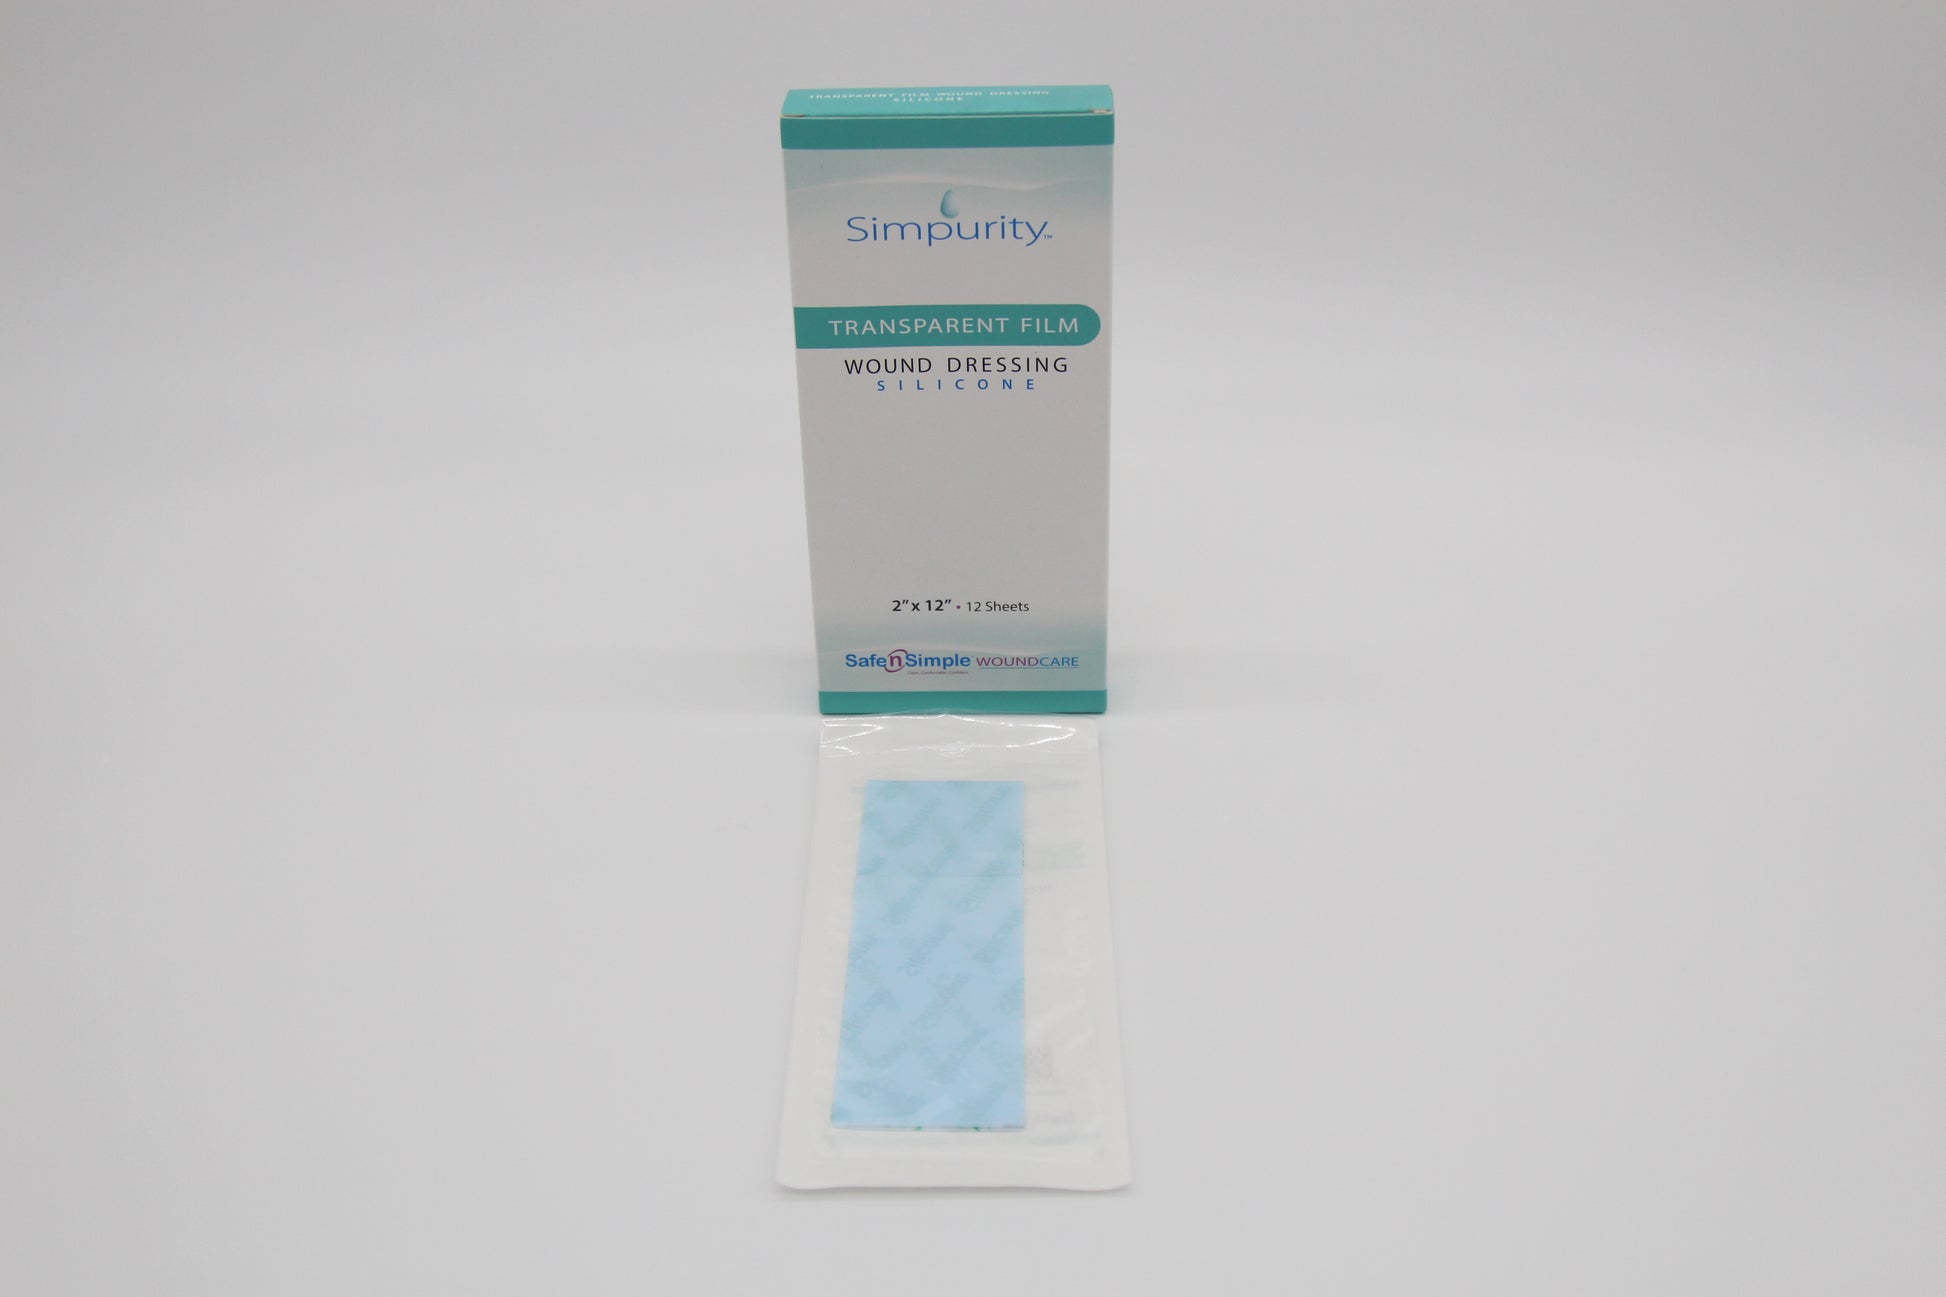 Transparent Silicone Film Dressings | Wound dressing | Wound care dressing | Advanced wound care